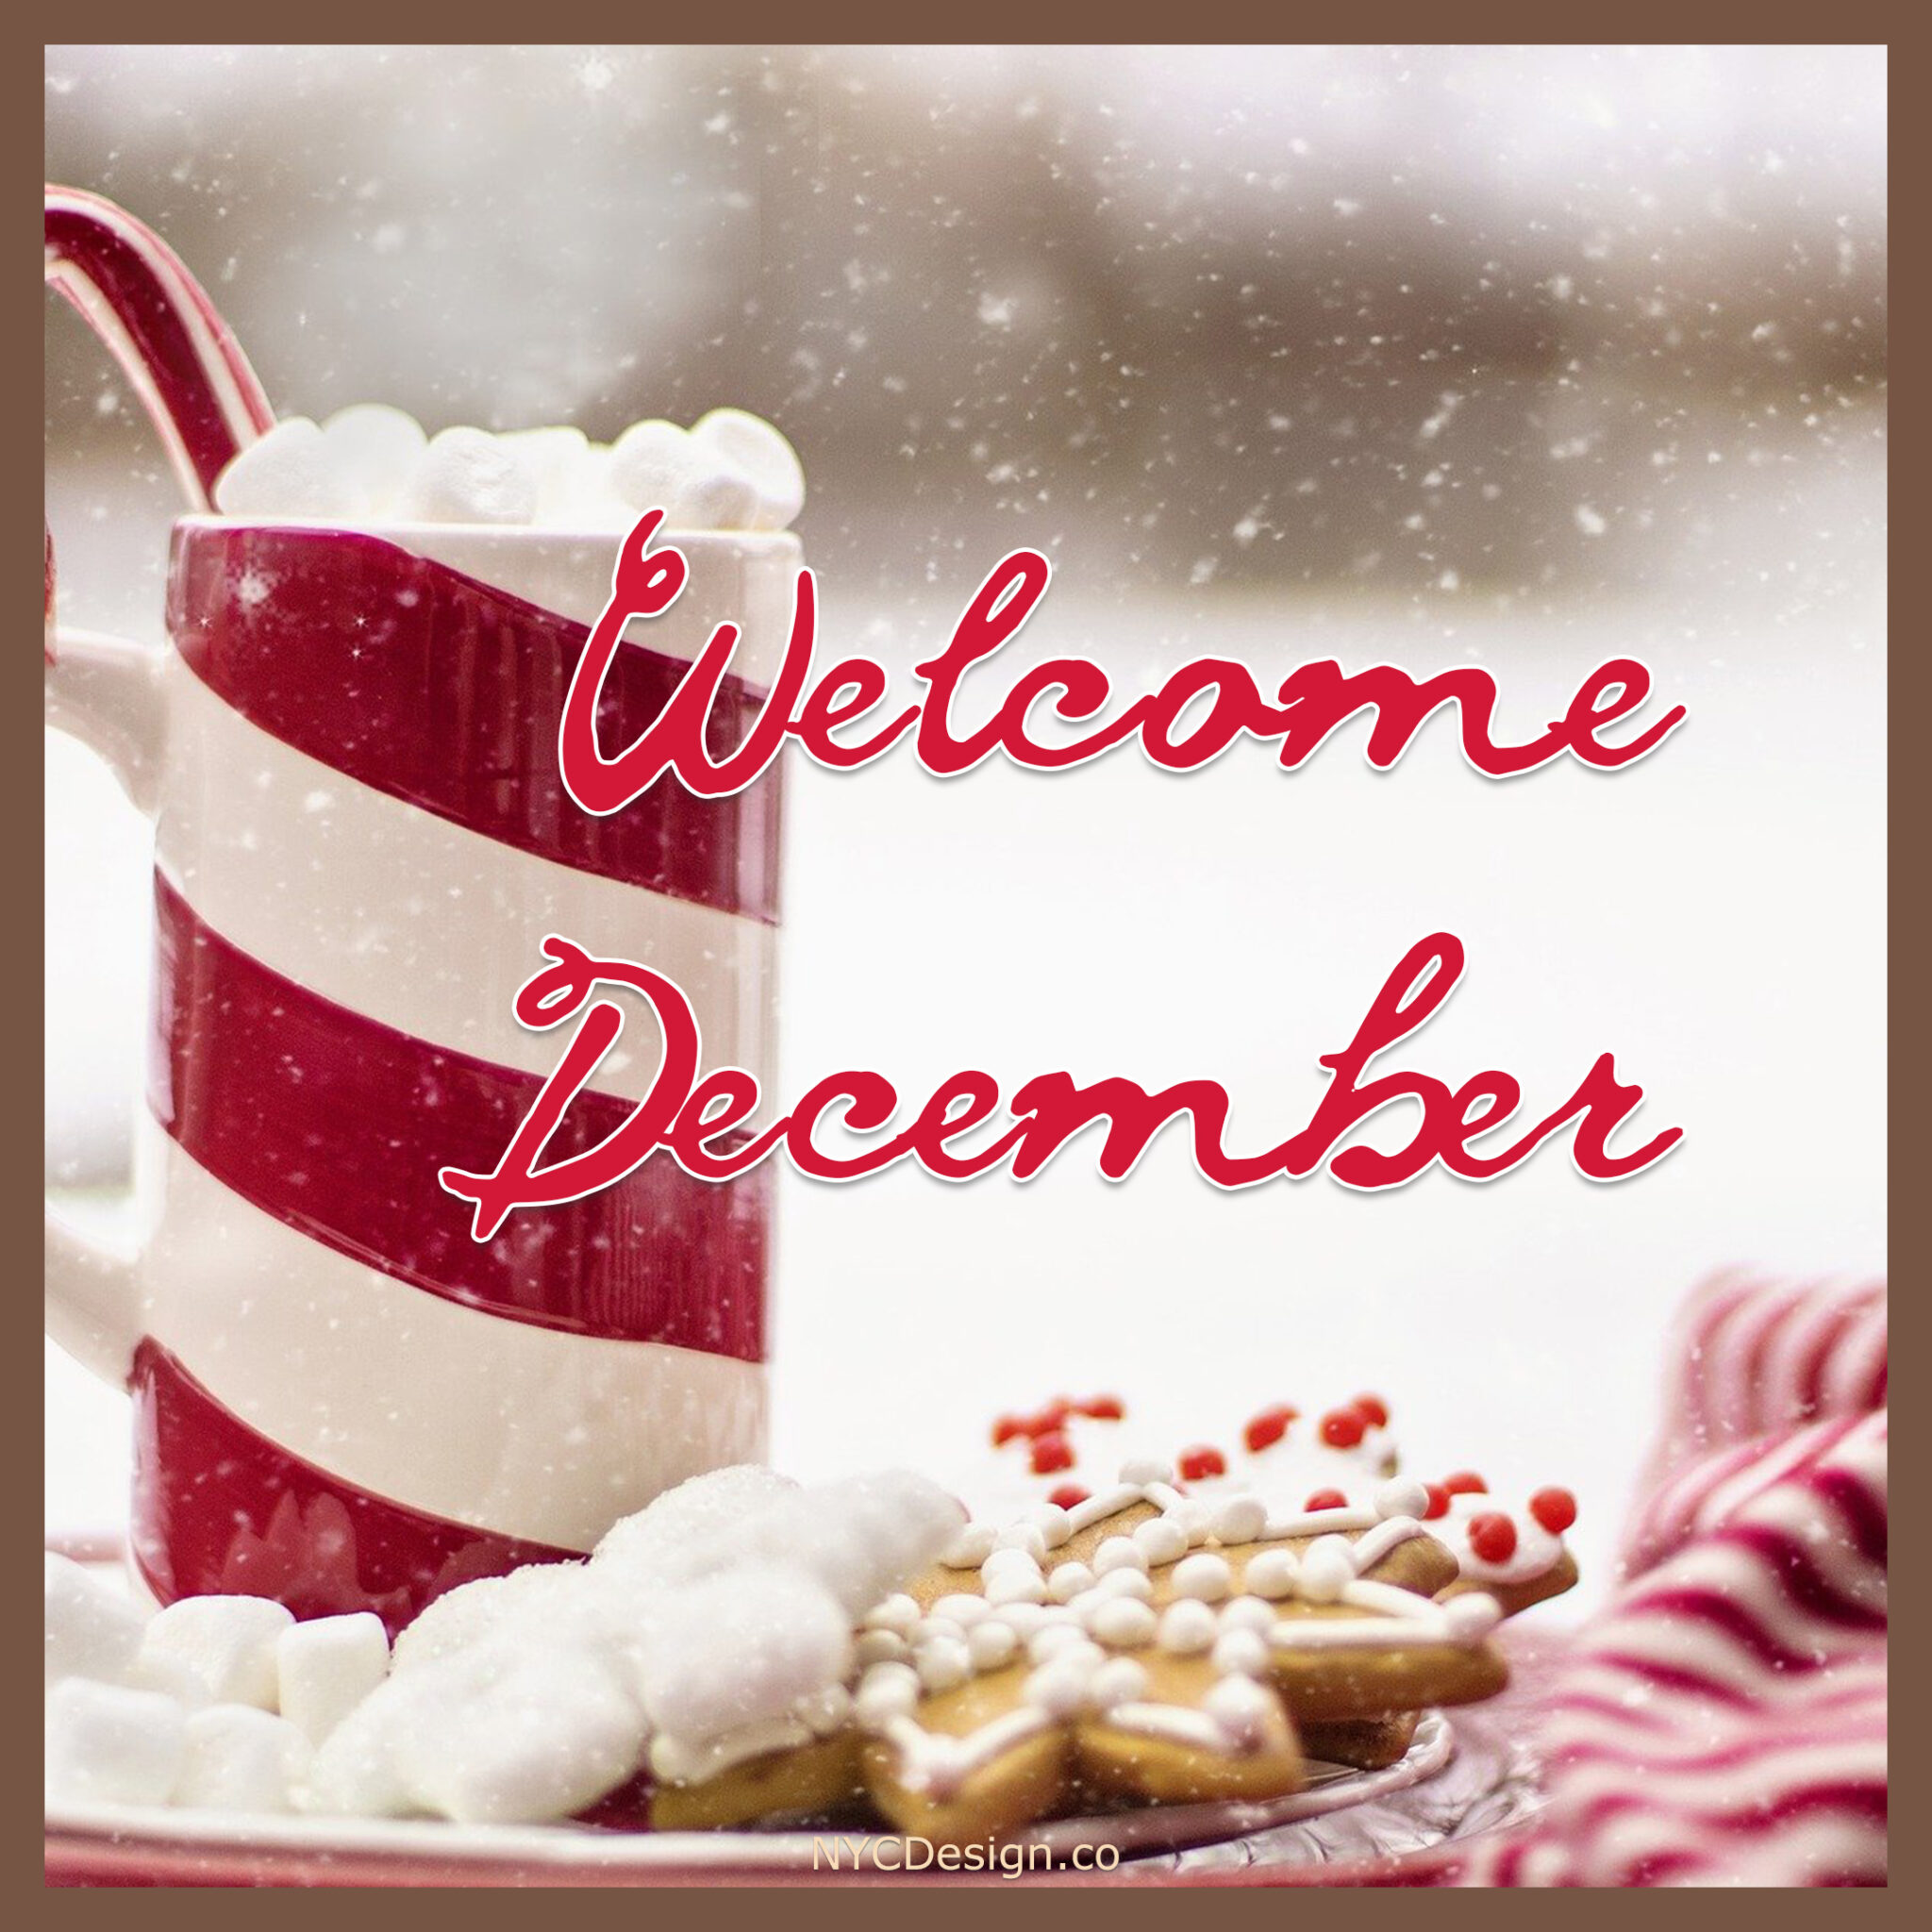 December Images for Instagram and Facebook NYCDesign.co